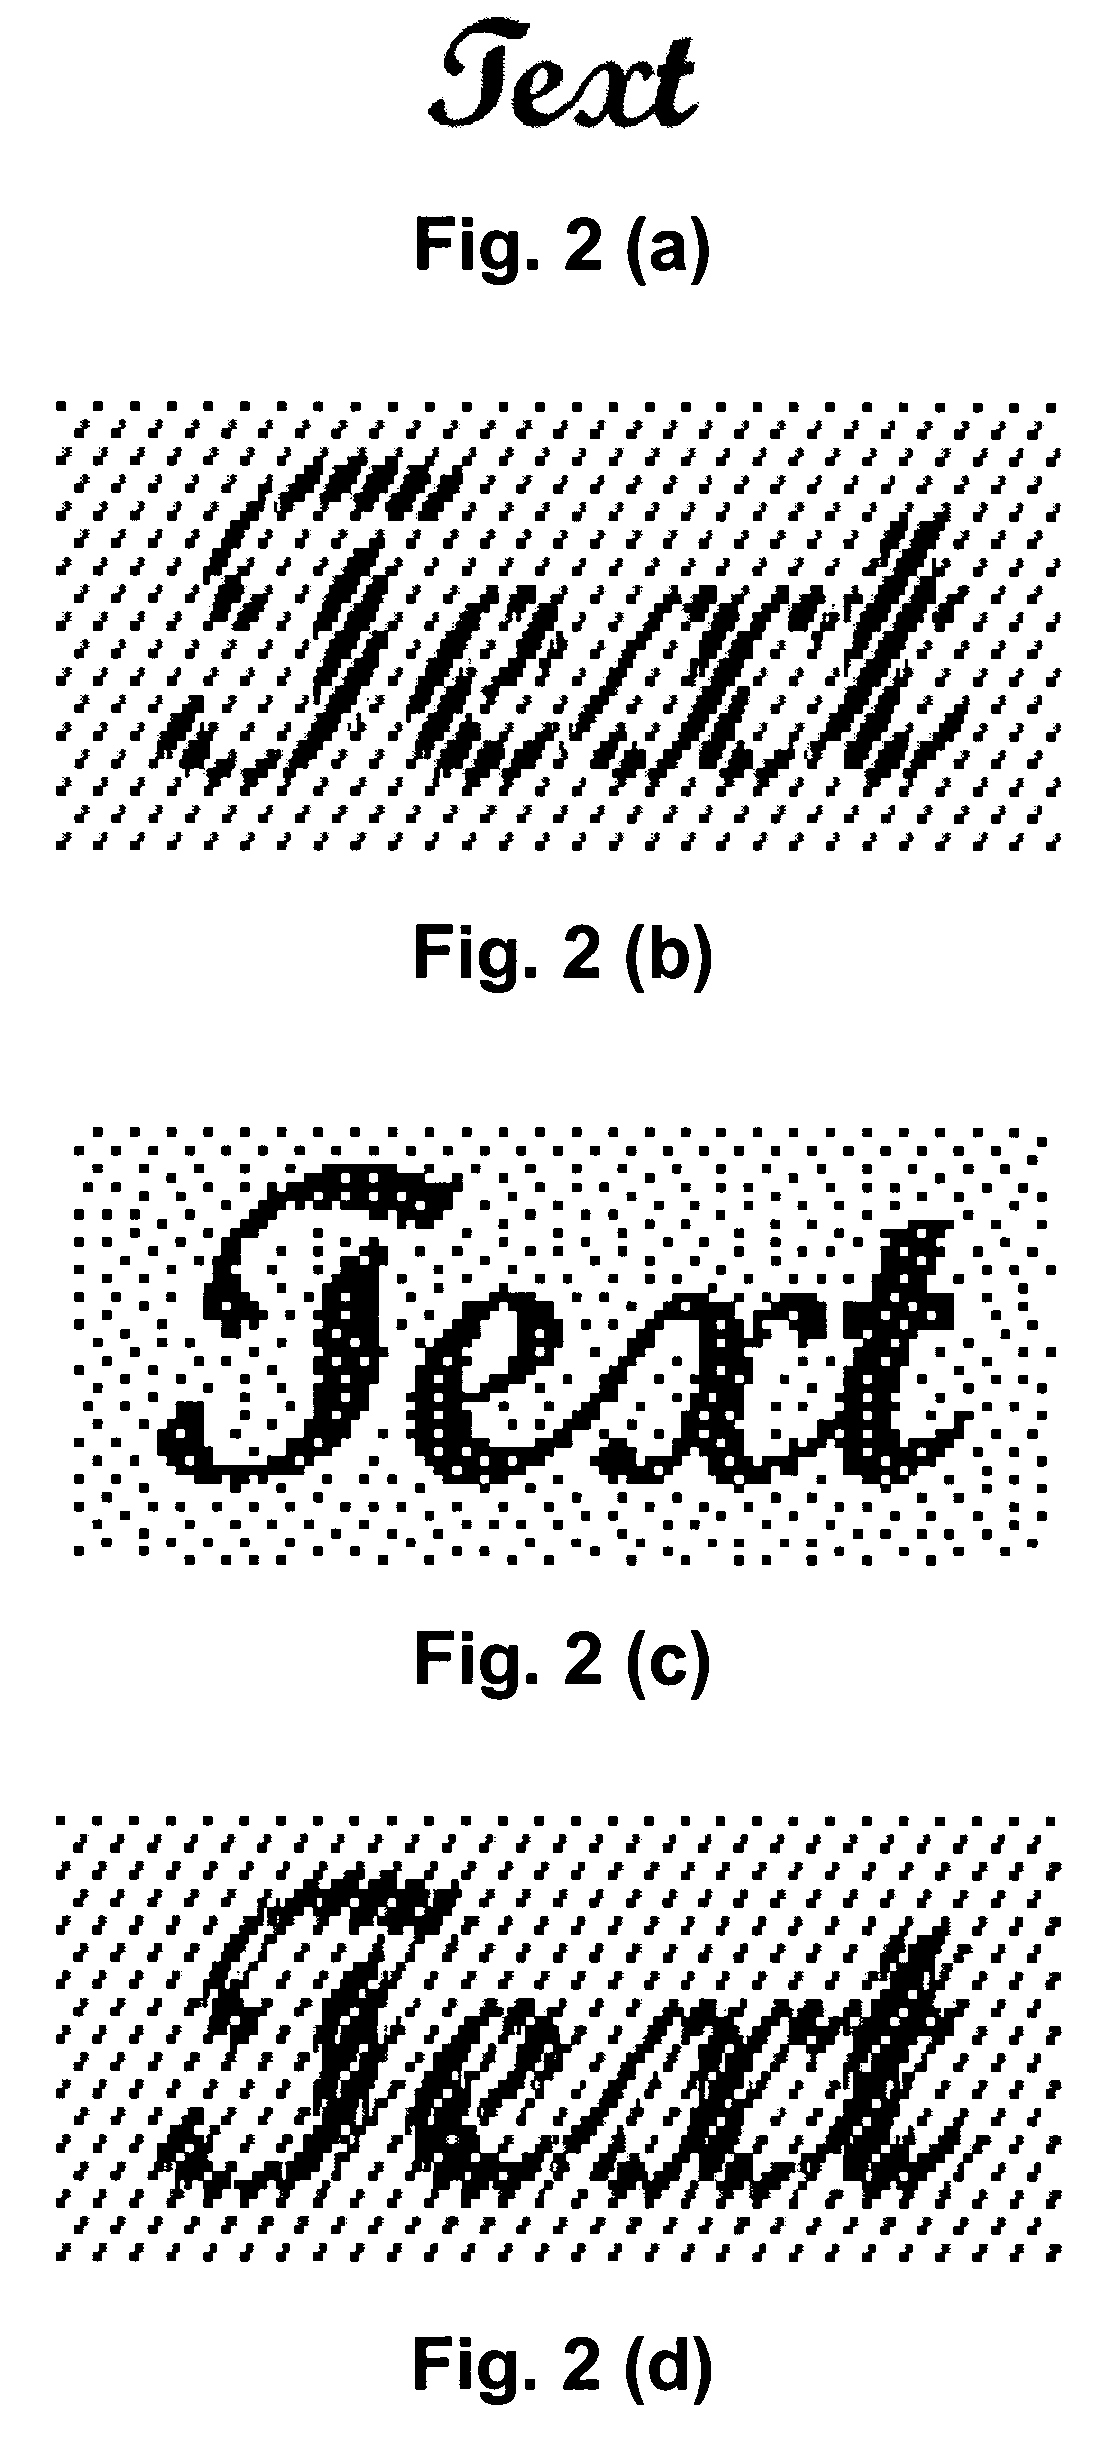 Adaptive halftone scheme to preserve image smoothness and sharpness by utilizing X-label